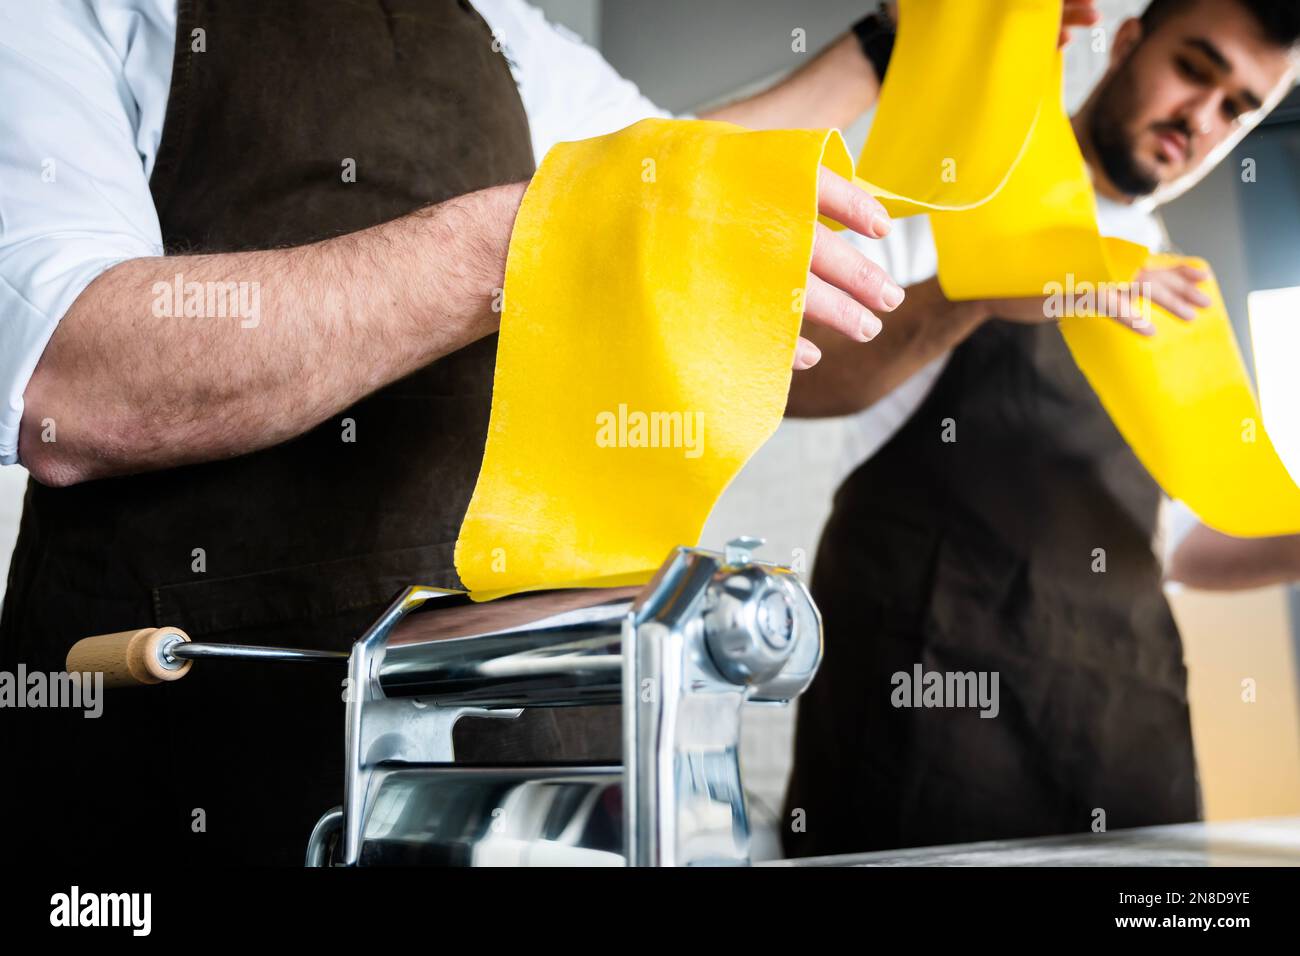 https://c8.alamy.com/comp/2N8D9YE/fresh-pasta-and-pasta-machine-italian-traditional-tagliatelle-young-men-in-apron-holding-the-dough-for-pasta-at-kitchen-2N8D9YE.jpg